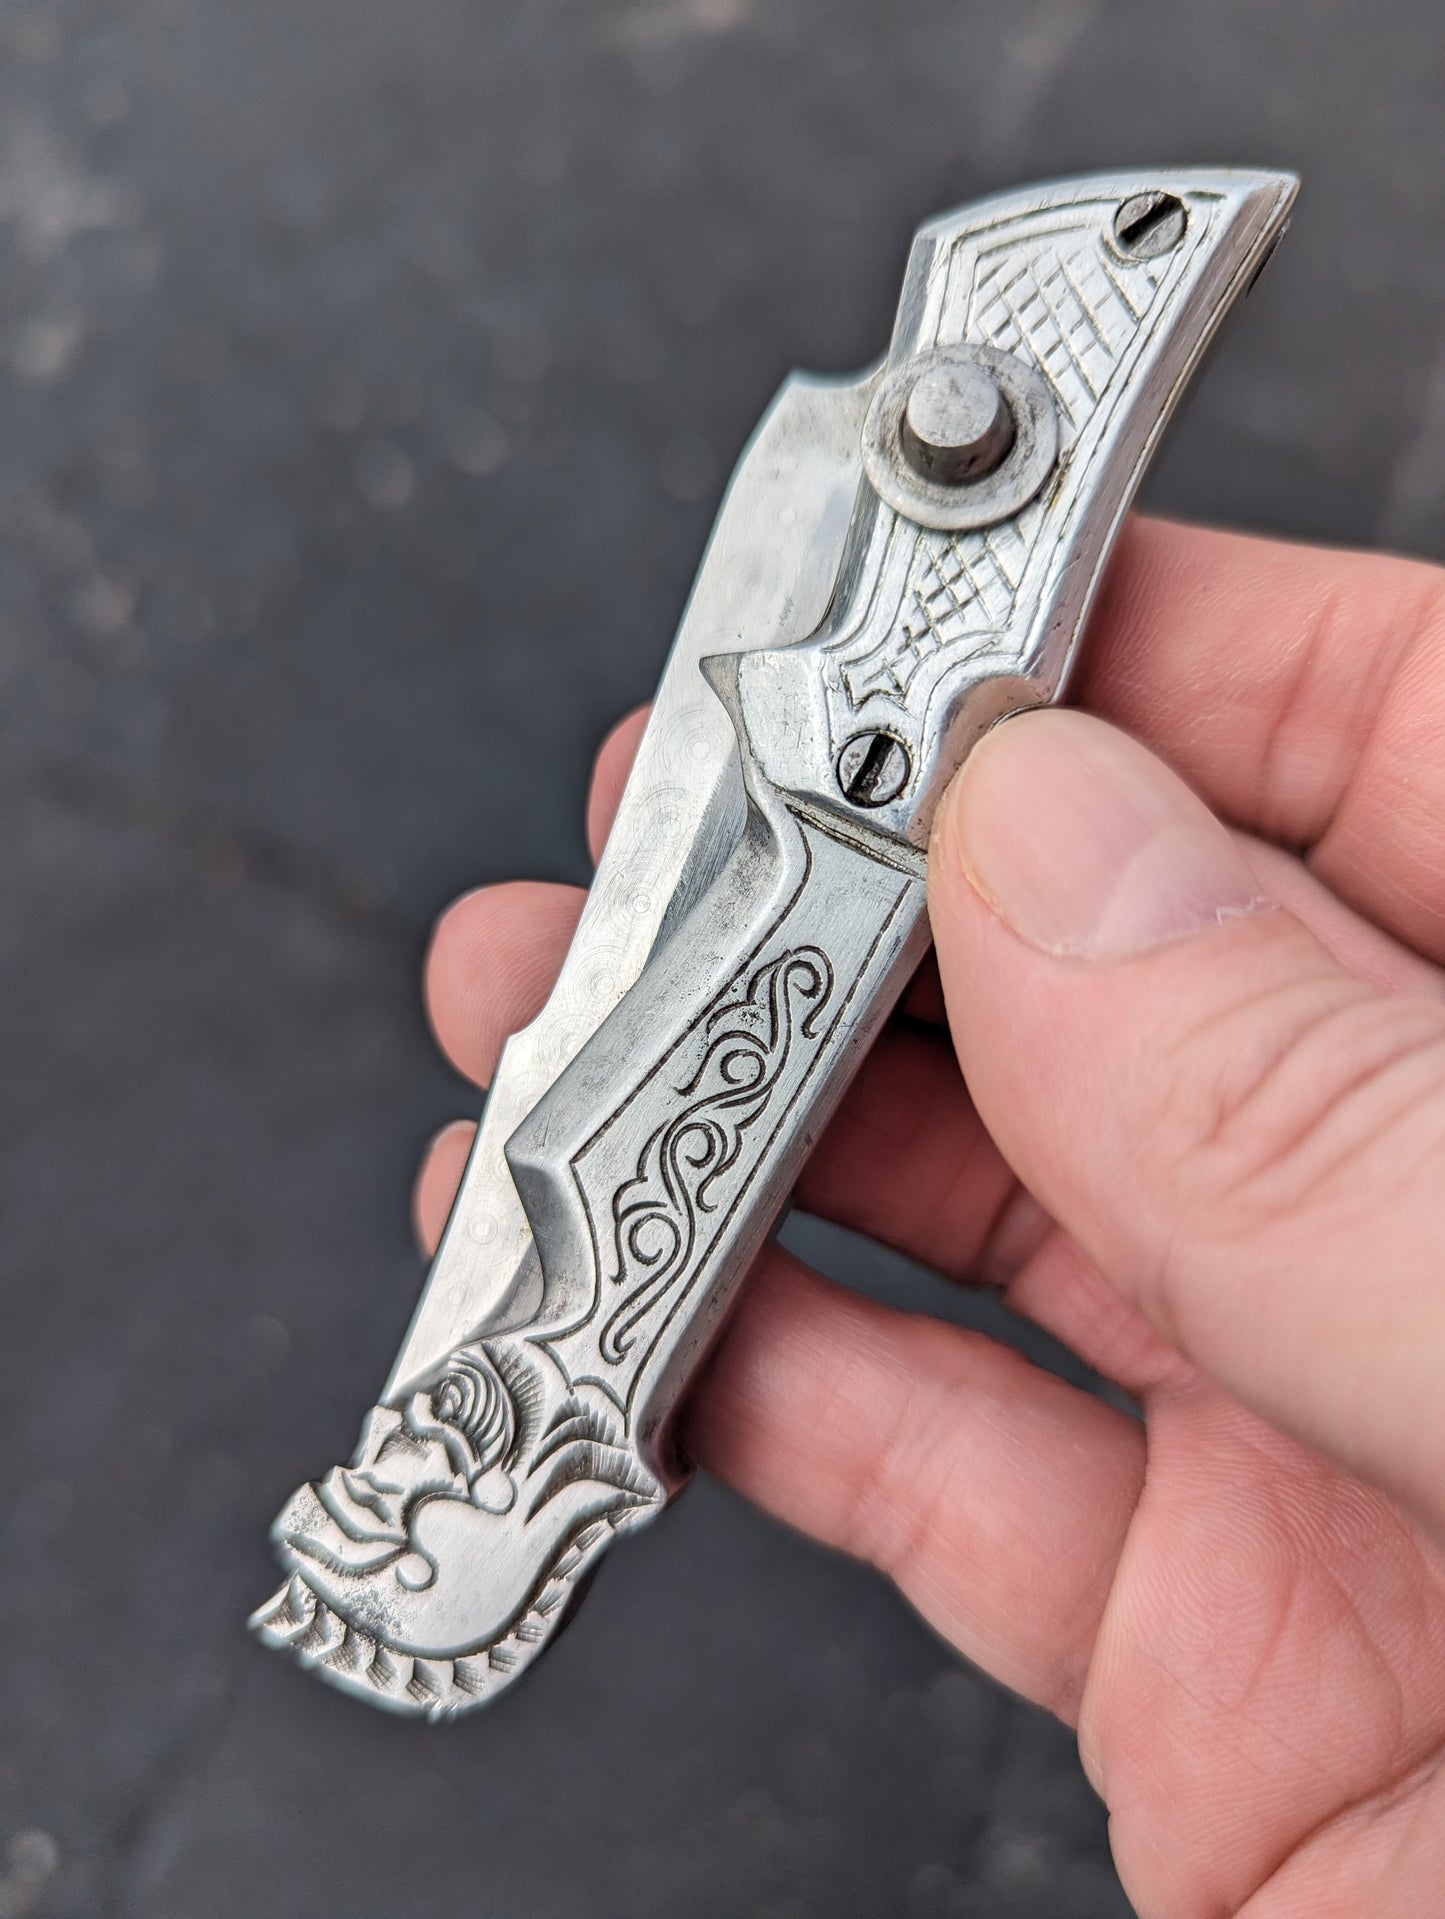 Engraved "Roman" Stainless Russian Prison Made Automatic Knife